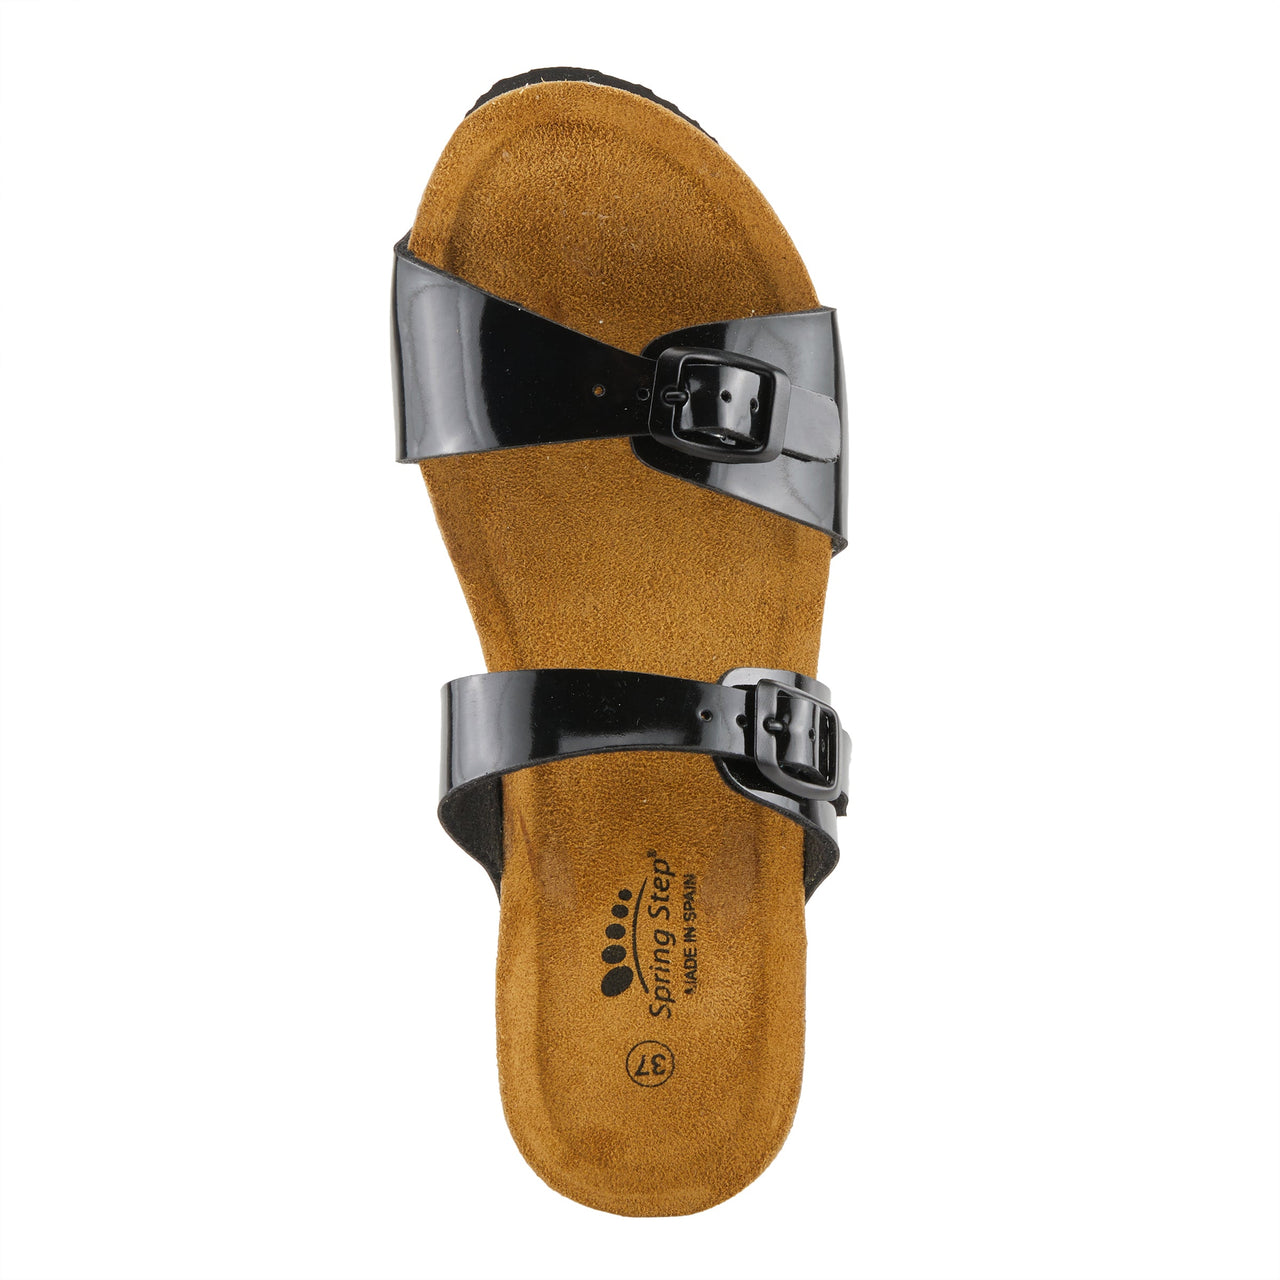 Stylish Spring Step Bynum Sandals with a fashionable open-toe design perfect for warm weather outings